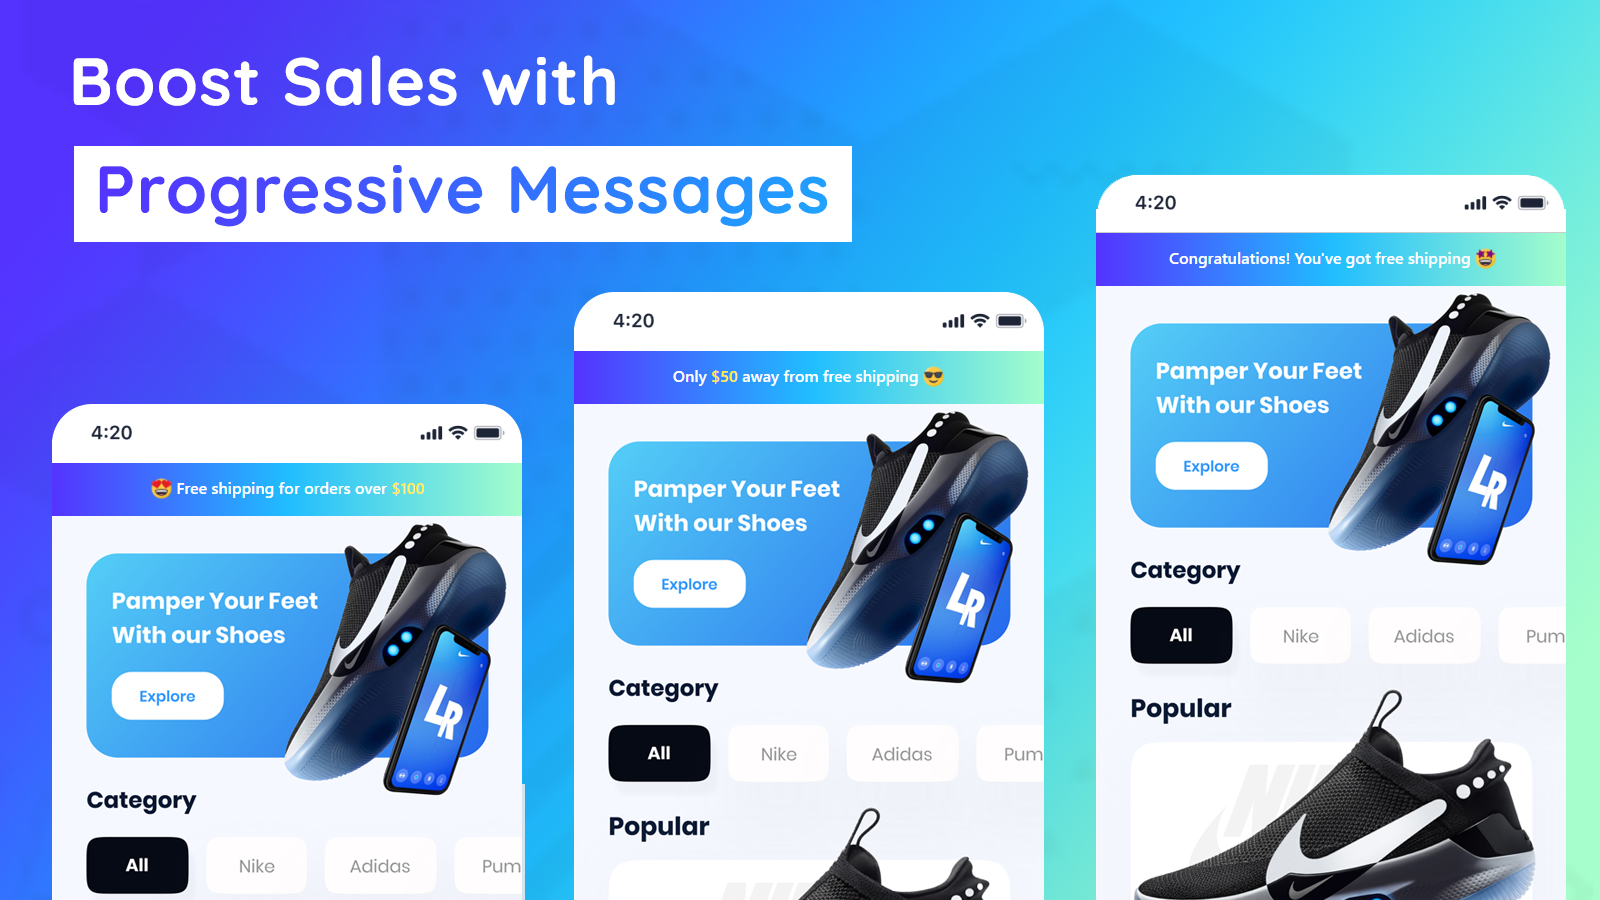 Boost sales with progressive messages